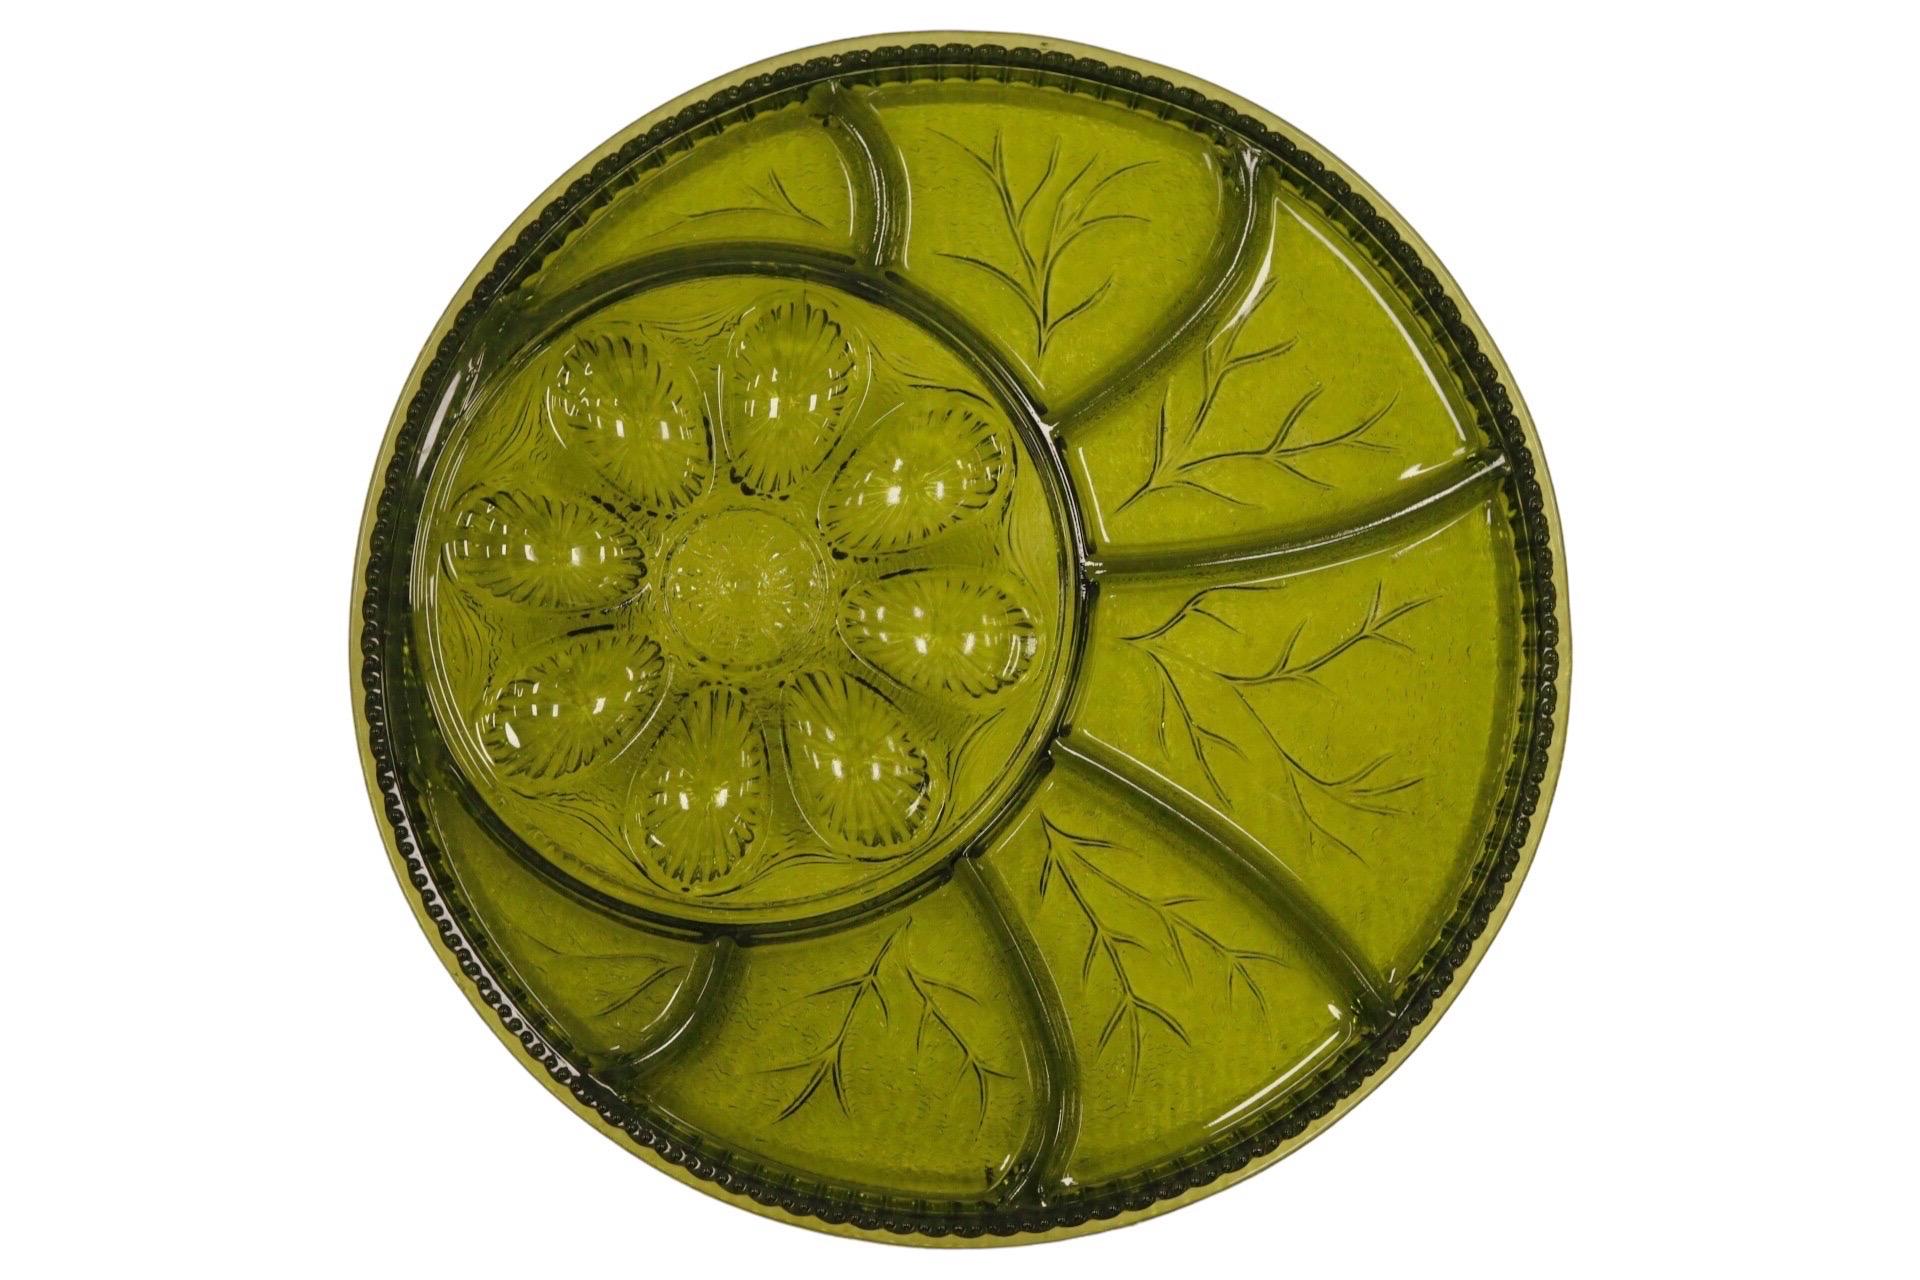 A circular glass deviled egg serving dish in avocado green. Holds eight egg halves pressed with a scalloped pattern, offset with seven additional serving compartments pressed to give a veined leaf look. Finished with a ribbed edge.
